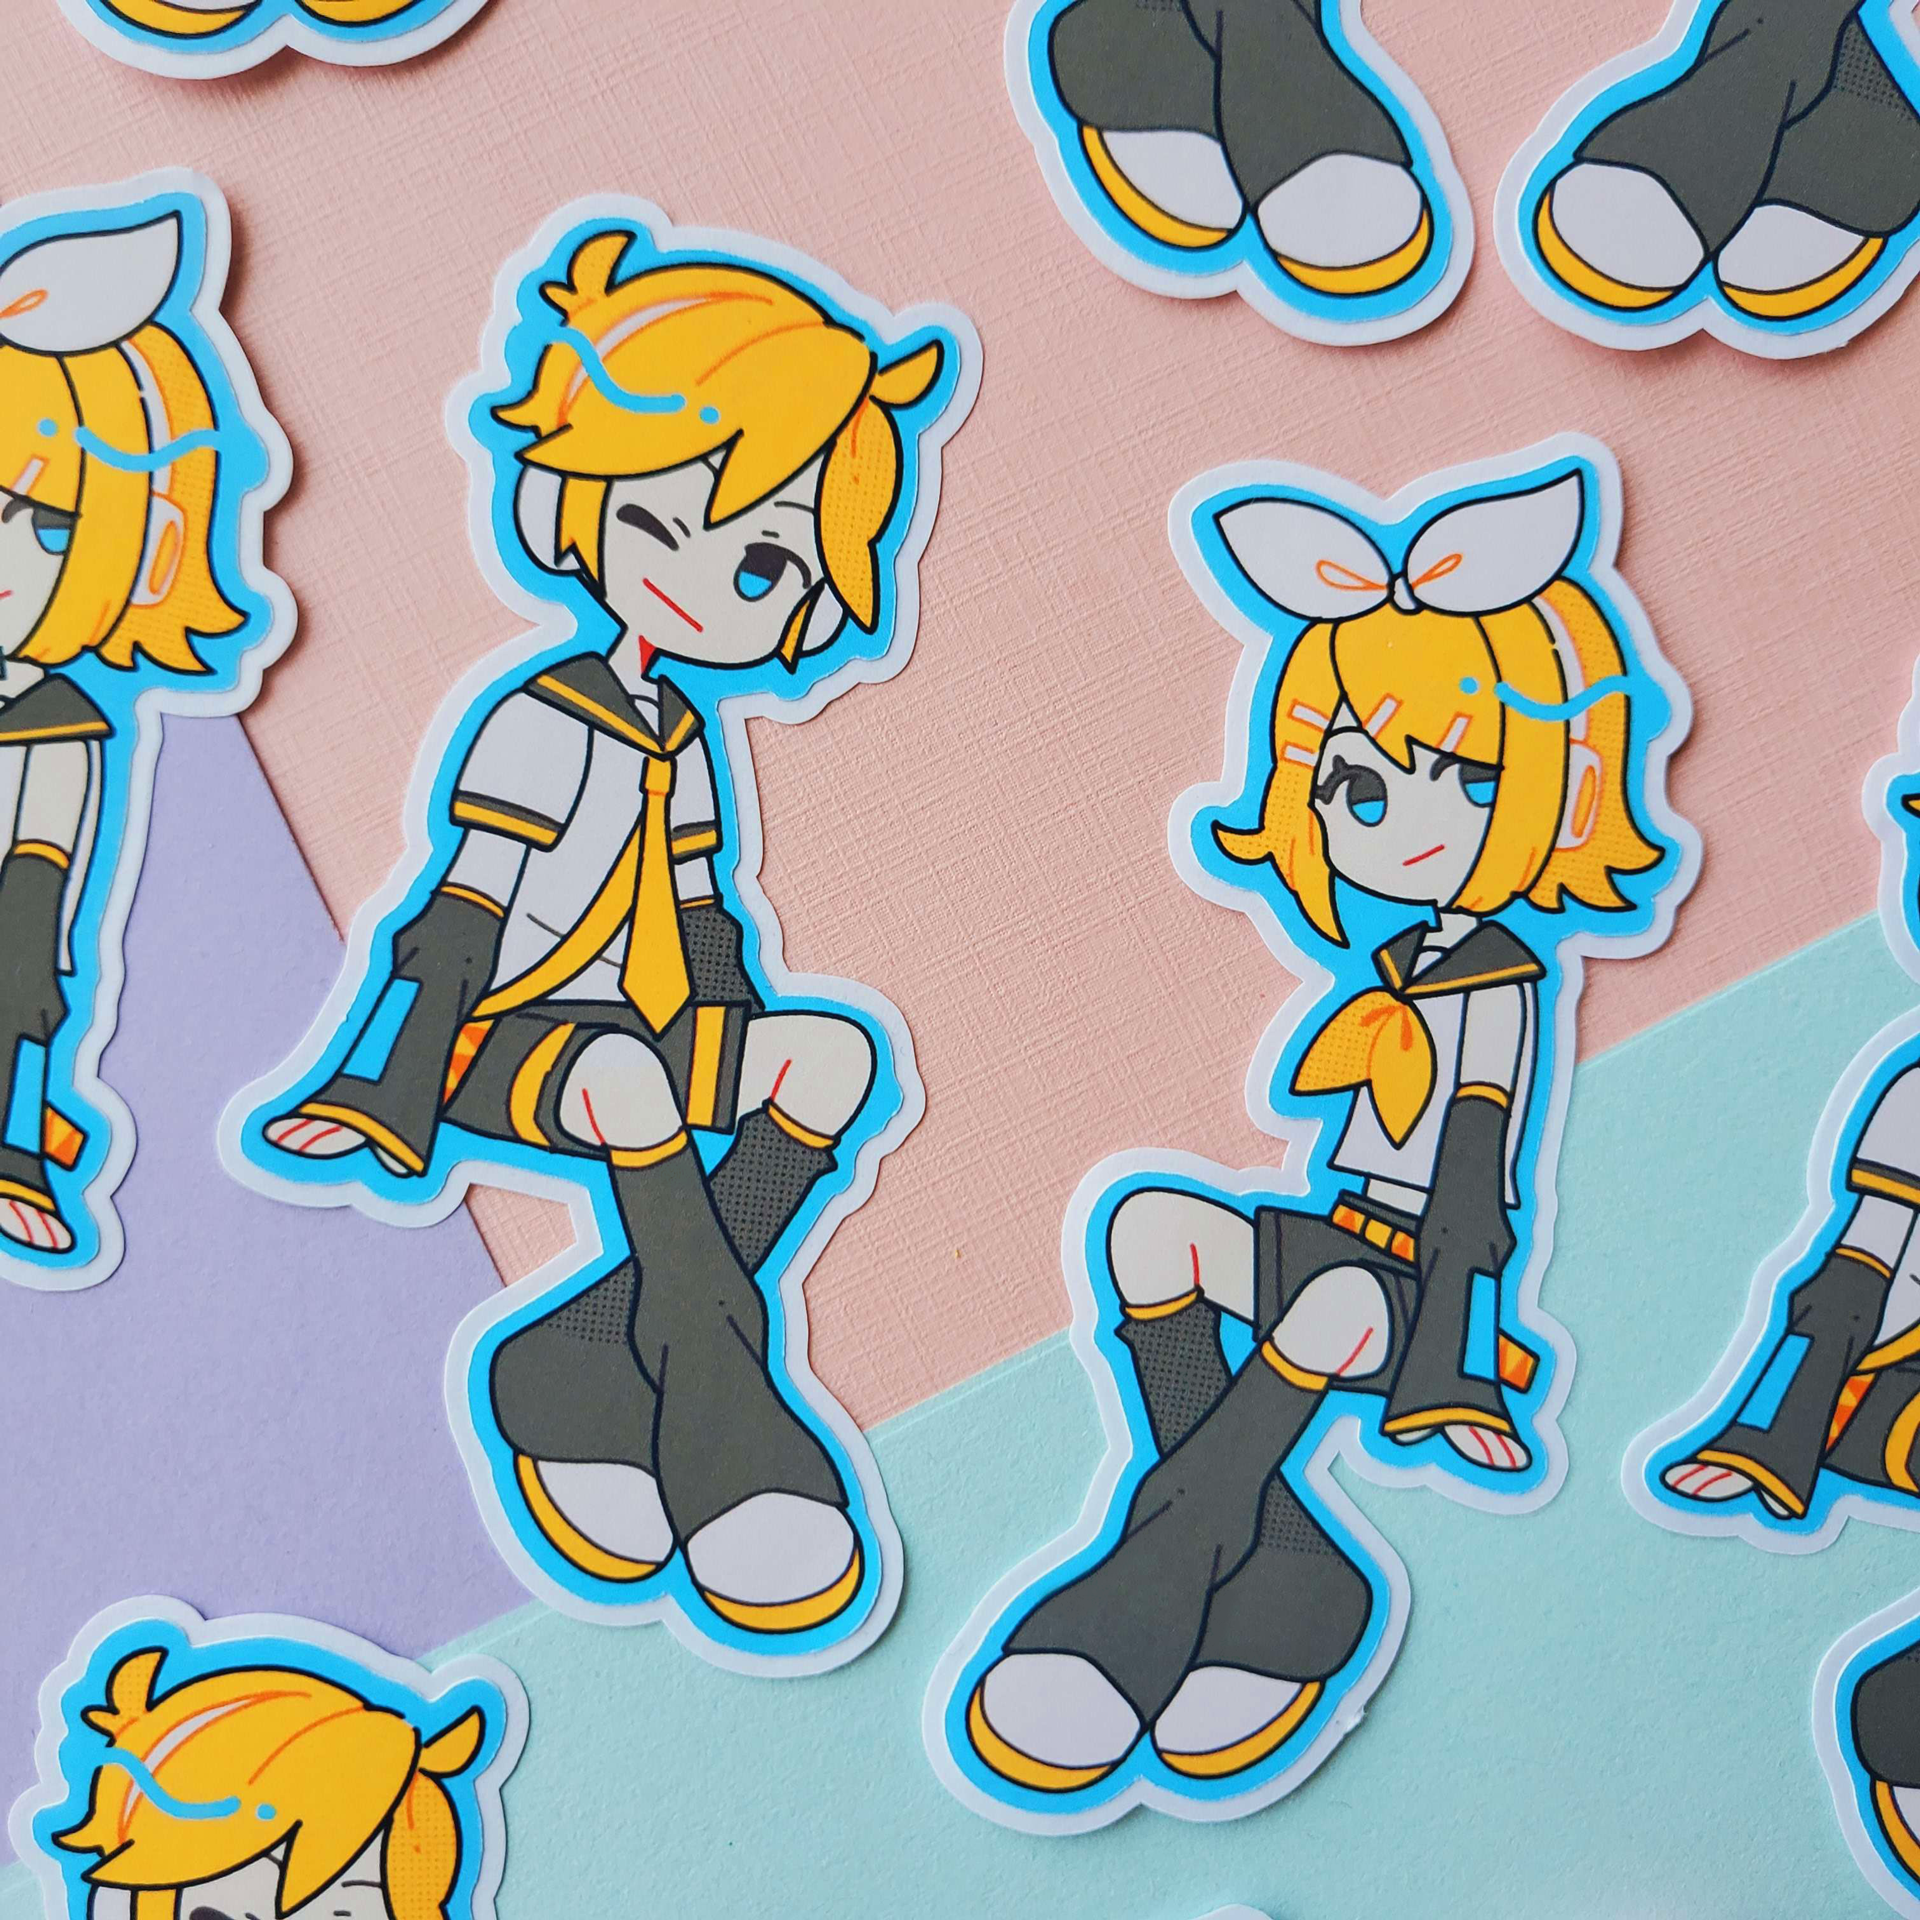 Vocaloid Rin Kagamine Stickers for Sale